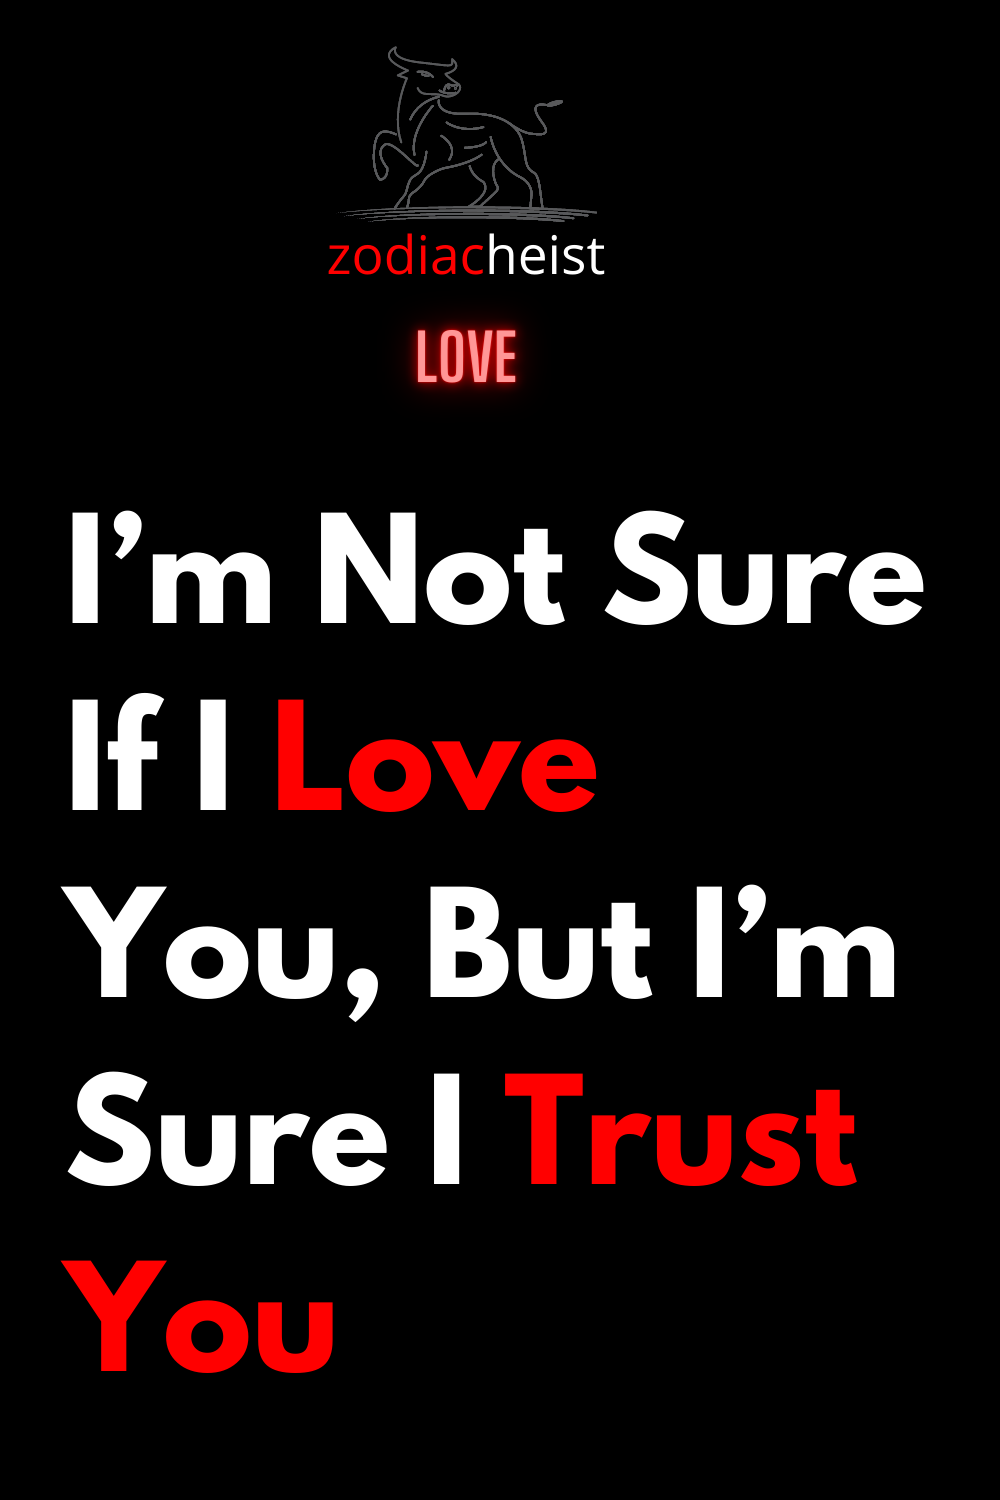 I’m Not Sure If I Love You, But I’m Sure I Trust You